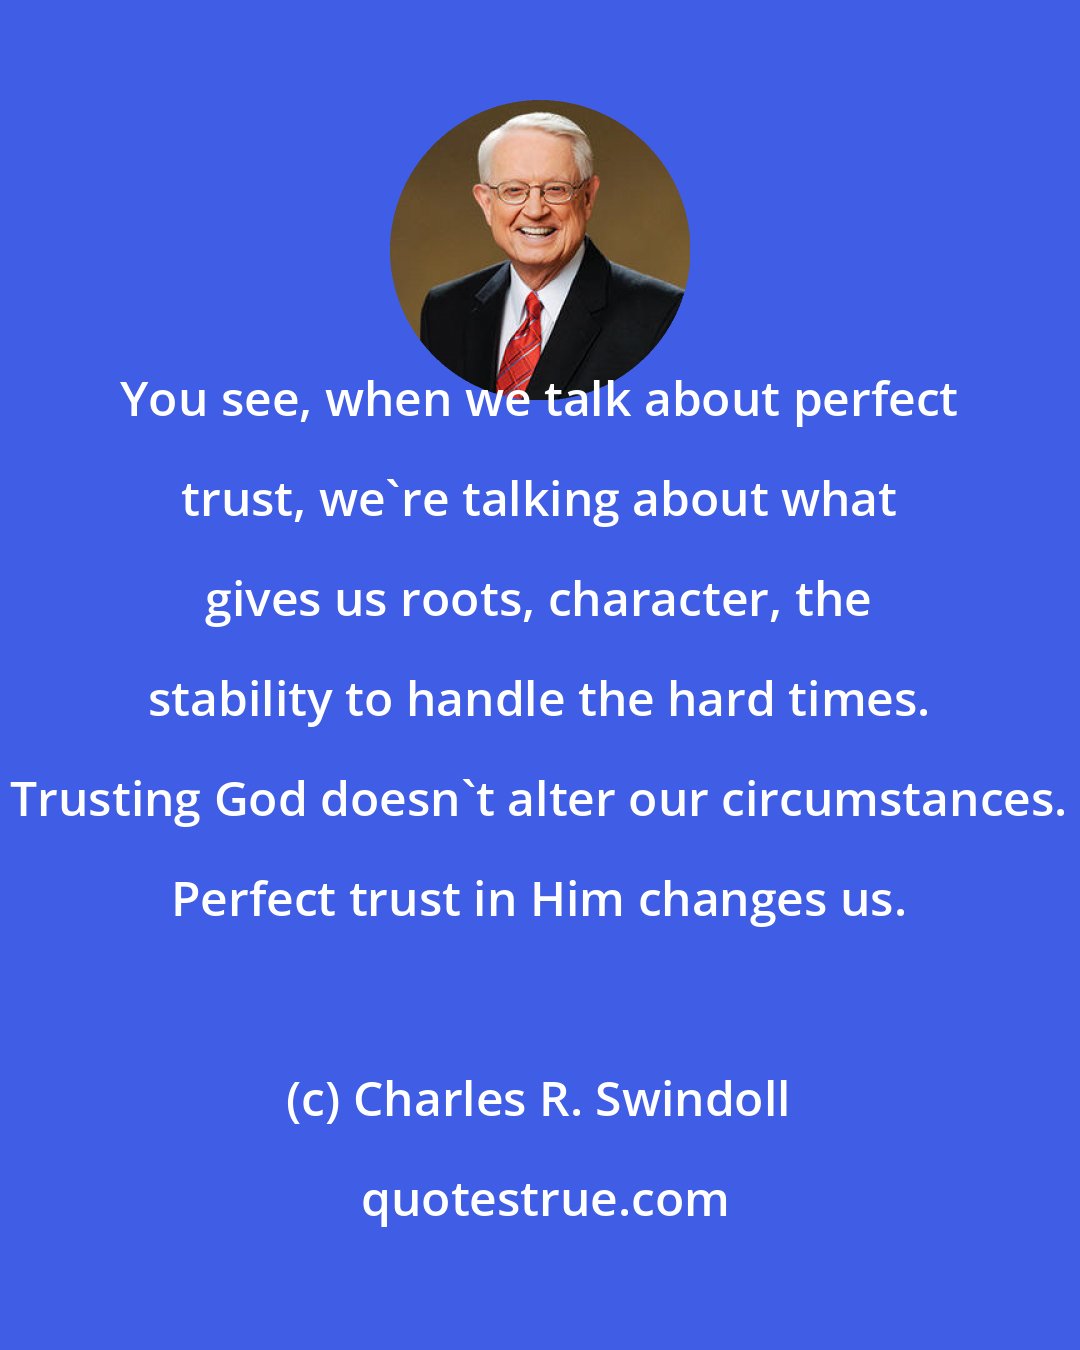 Charles R. Swindoll: You see, when we talk about perfect trust, we're talking about what gives us roots, character, the stability to handle the hard times. Trusting God doesn't alter our circumstances. Perfect trust in Him changes us.